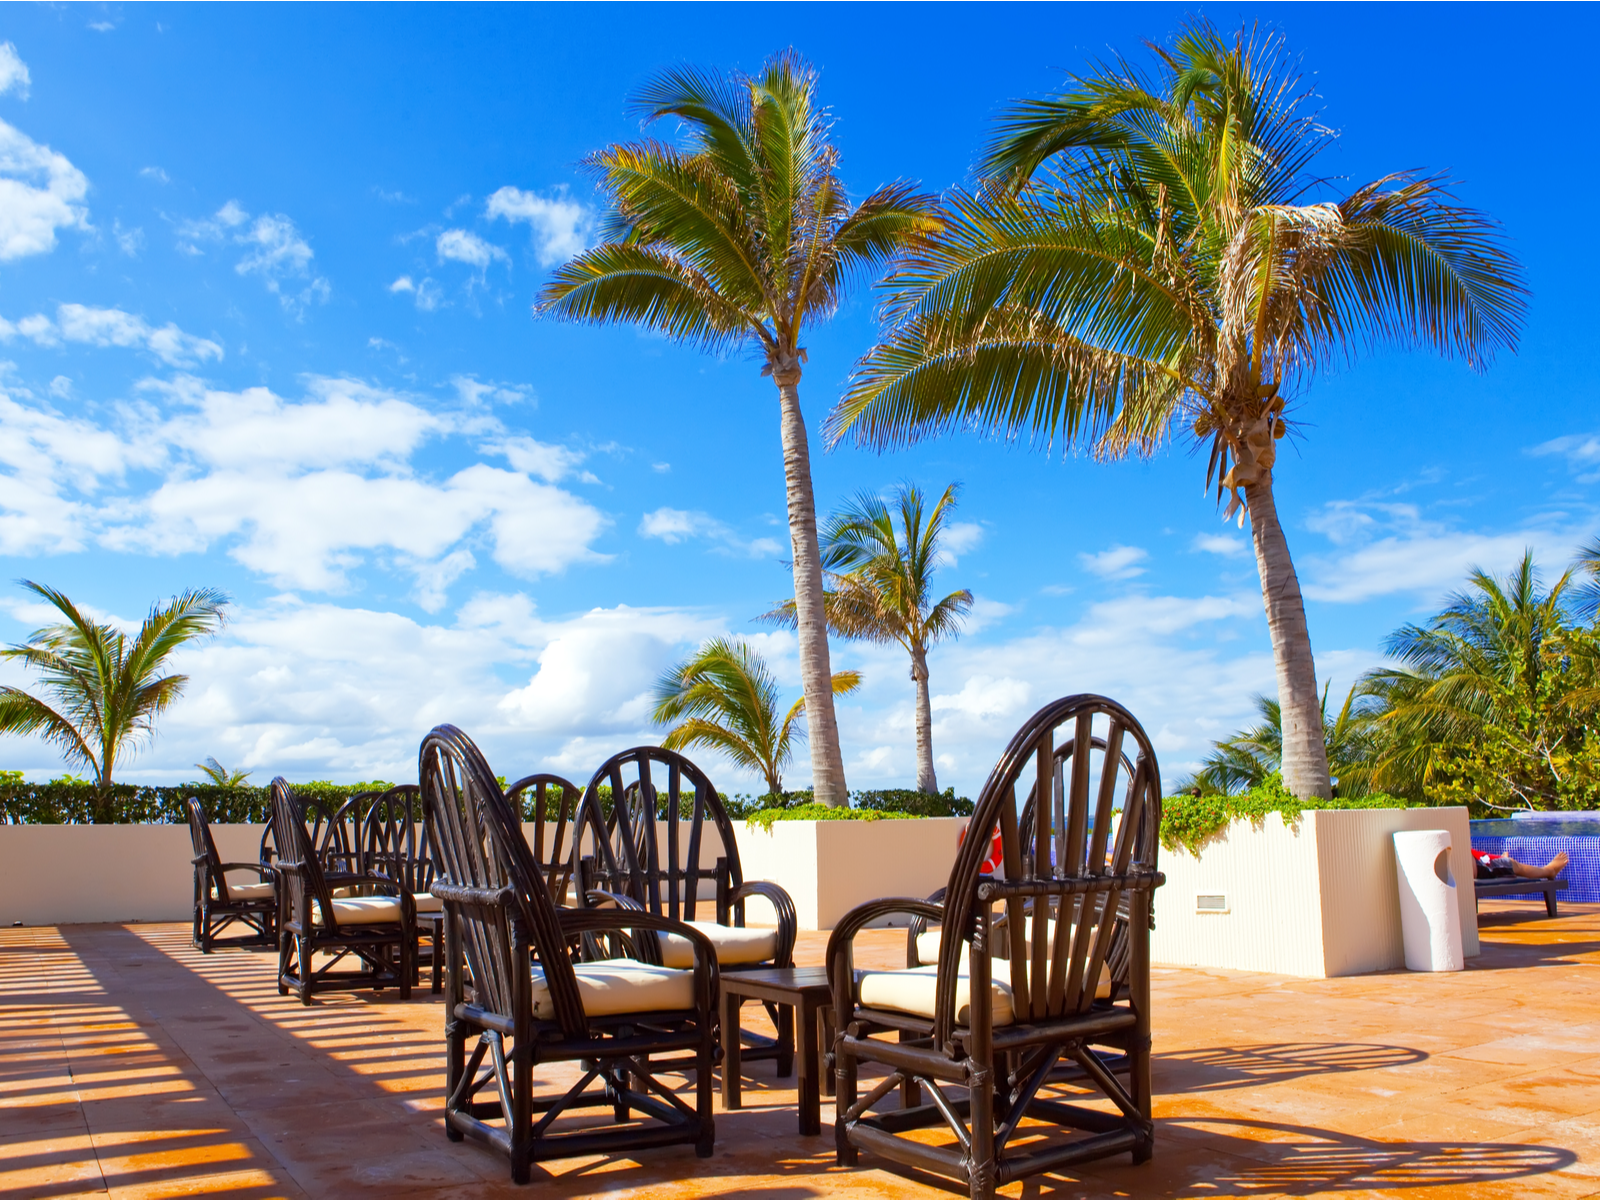 Partly cloudy blue skies over coconuts and empty Rattan chairs at Dreams Natura Resort & Spa, named as one of the best all-inclusive resorts in Mexico